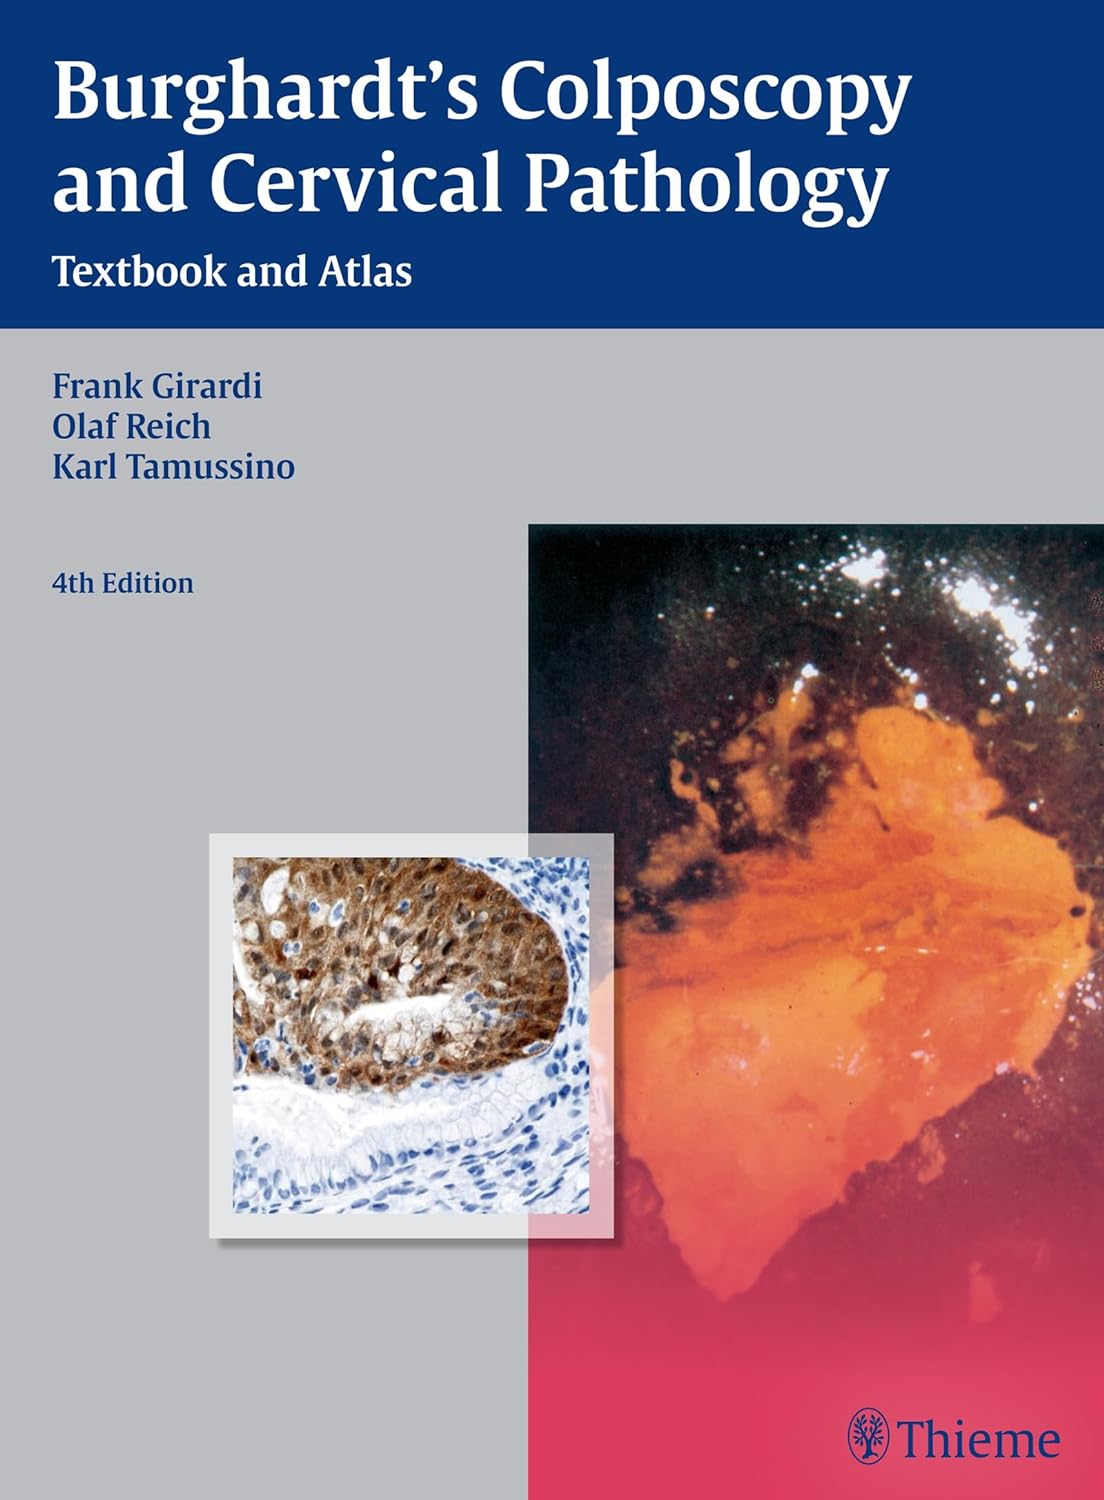 Burghardt's Colposcopy And Cervical Pathology Textbook And Atlas 4th Edition